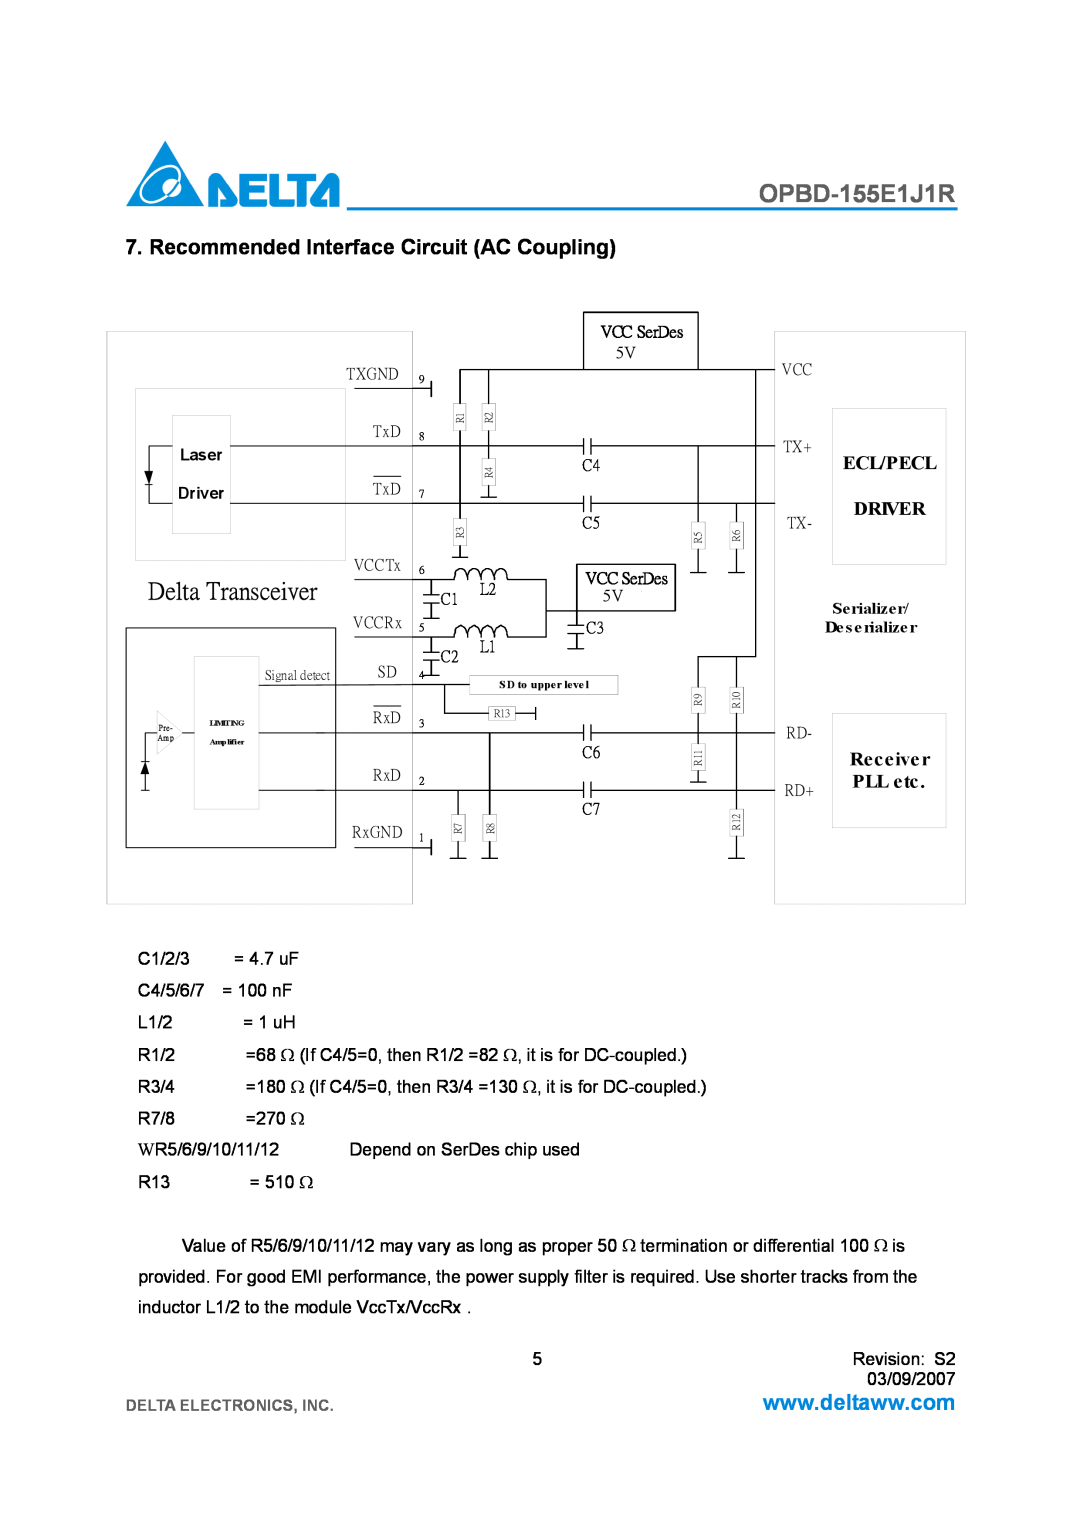 Delta Electronics OPBD-155E1J1R Recommended Interface Circuit AC Coupling, Delta Transceiver, Ecl/Pecl, Driver, Receiver 